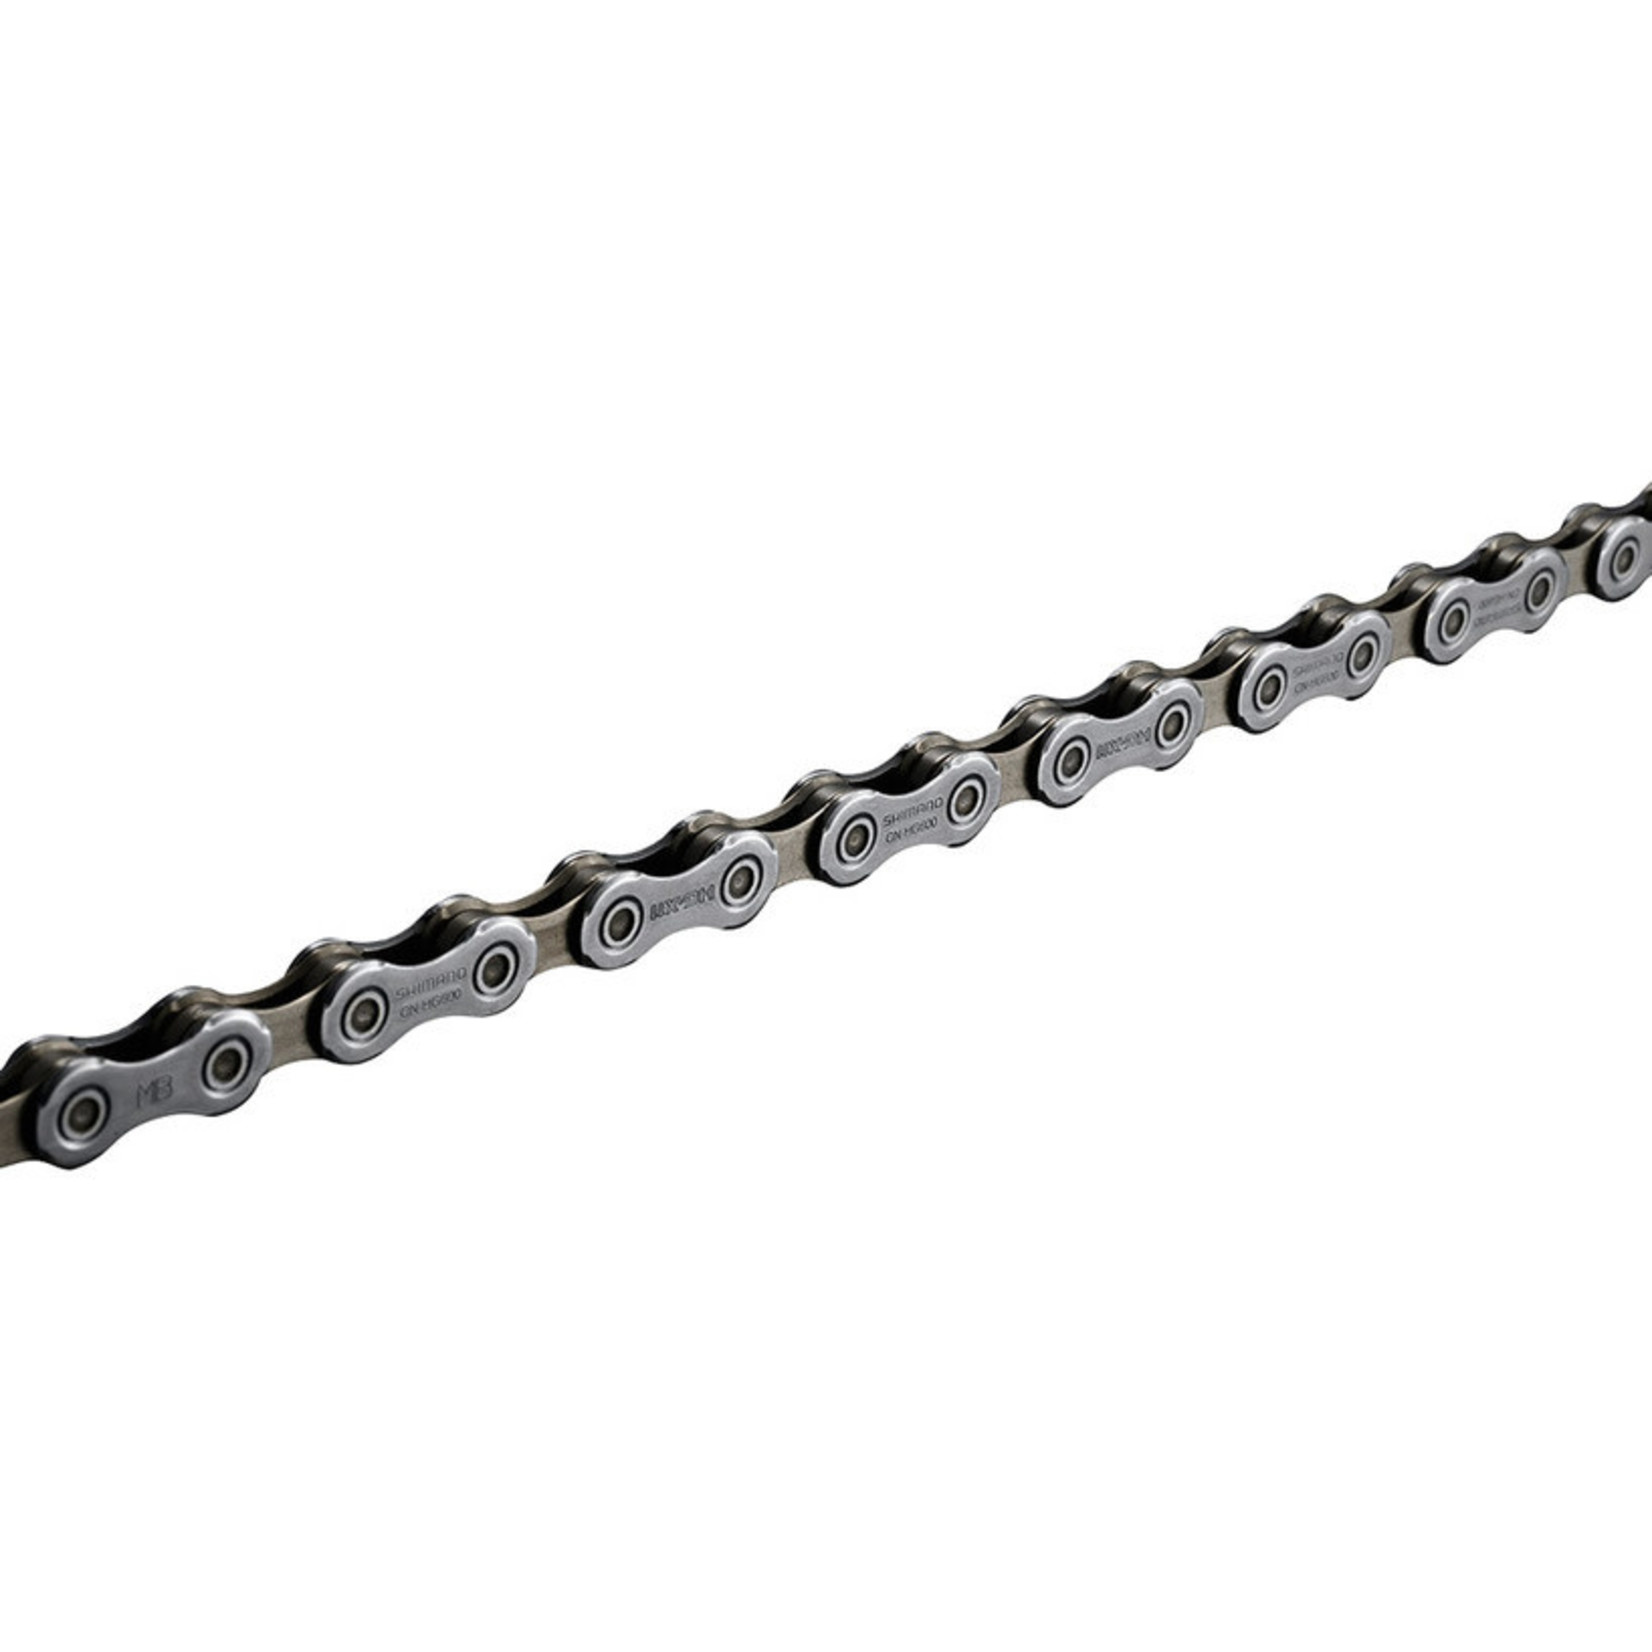 Shimano CHAIN, CN-HG601-11, FOR 11-SPEED (ROAD/MTB/E-BIKE COMPATIBLE), 126 LINKS (W/QUICK LINK, SM-CN900-11)